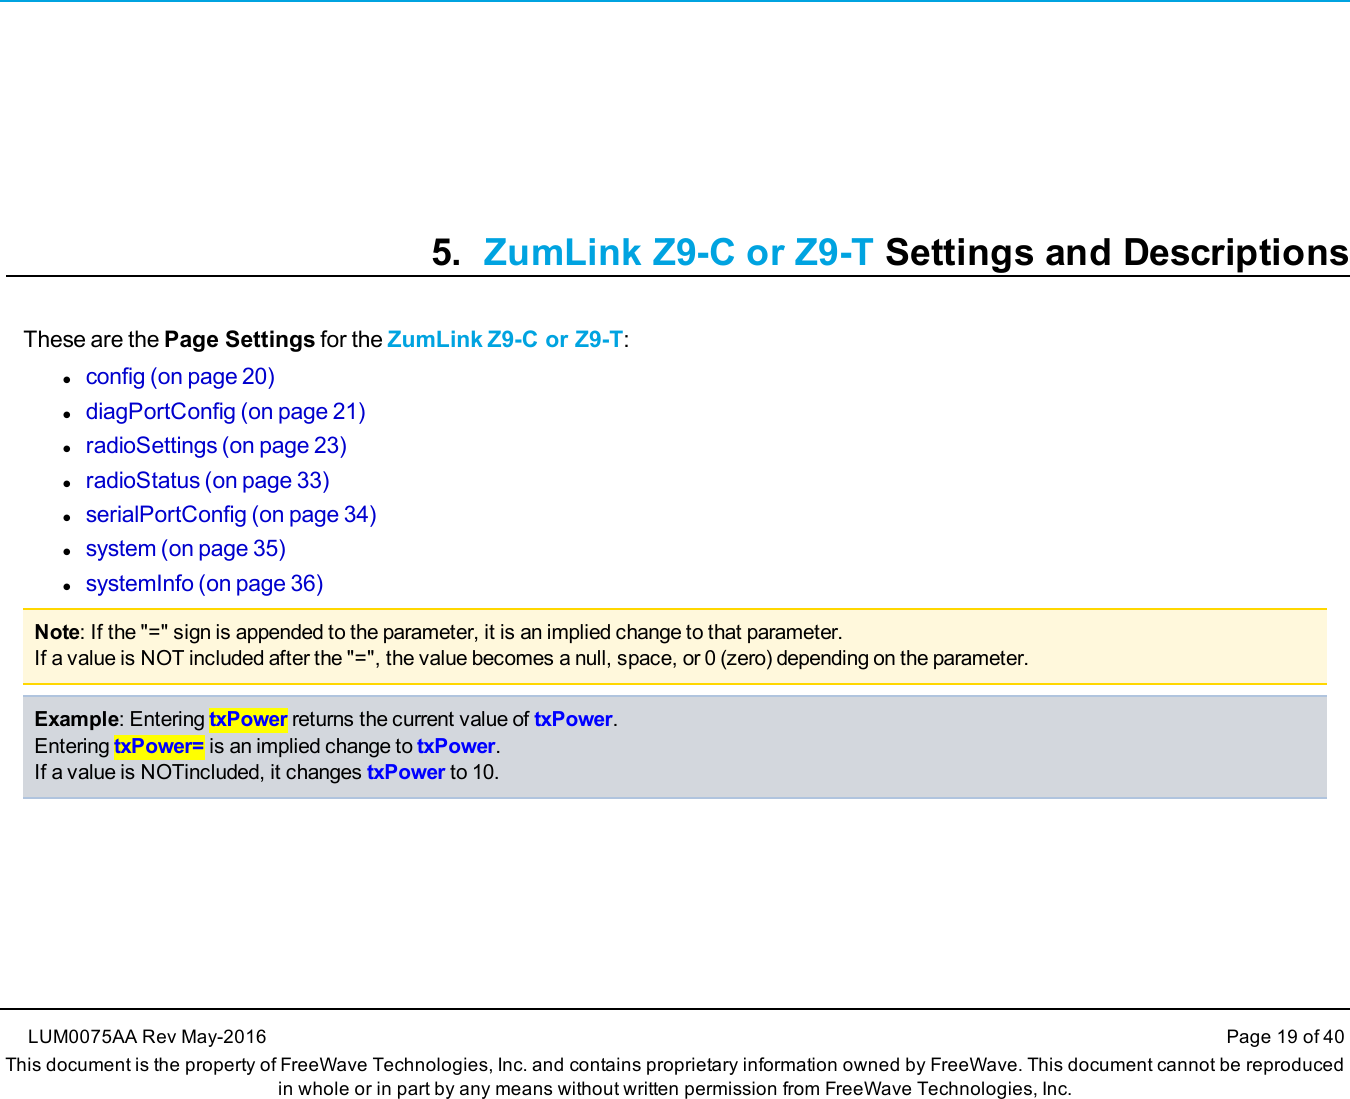 5. ZumLink Z9-C or Z9-T Settings and DescriptionsThese are the Page Settings for the ZumLink Z9-C or Z9-T:lconfig (on page 20)ldiagPortConfig (on page 21)lradioSettings (on page 23)lradioStatus (on page 33)lserialPortConfig (on page 34)lsystem (on page 35)lsystemInfo (on page 36)Note: If the &quot;=&quot; sign is appended to the parameter, it is an implied change to that parameter.If a value is NOT included after the &quot;=&quot;, the value becomes a null, space, or 0 (zero) depending on the parameter.Example: Entering txPower returns the current value of txPower.Entering txPower= is an implied change to txPower.If a value is NOTincluded, it changes txPower to 10.LUM0075AA Rev May-2016 Page 19 of 40This document is the property of FreeWave Technologies, Inc. and contains proprietary information owned by FreeWave. This document cannot be reproducedin whole or in part by any means without written permission from FreeWave Technologies, Inc.